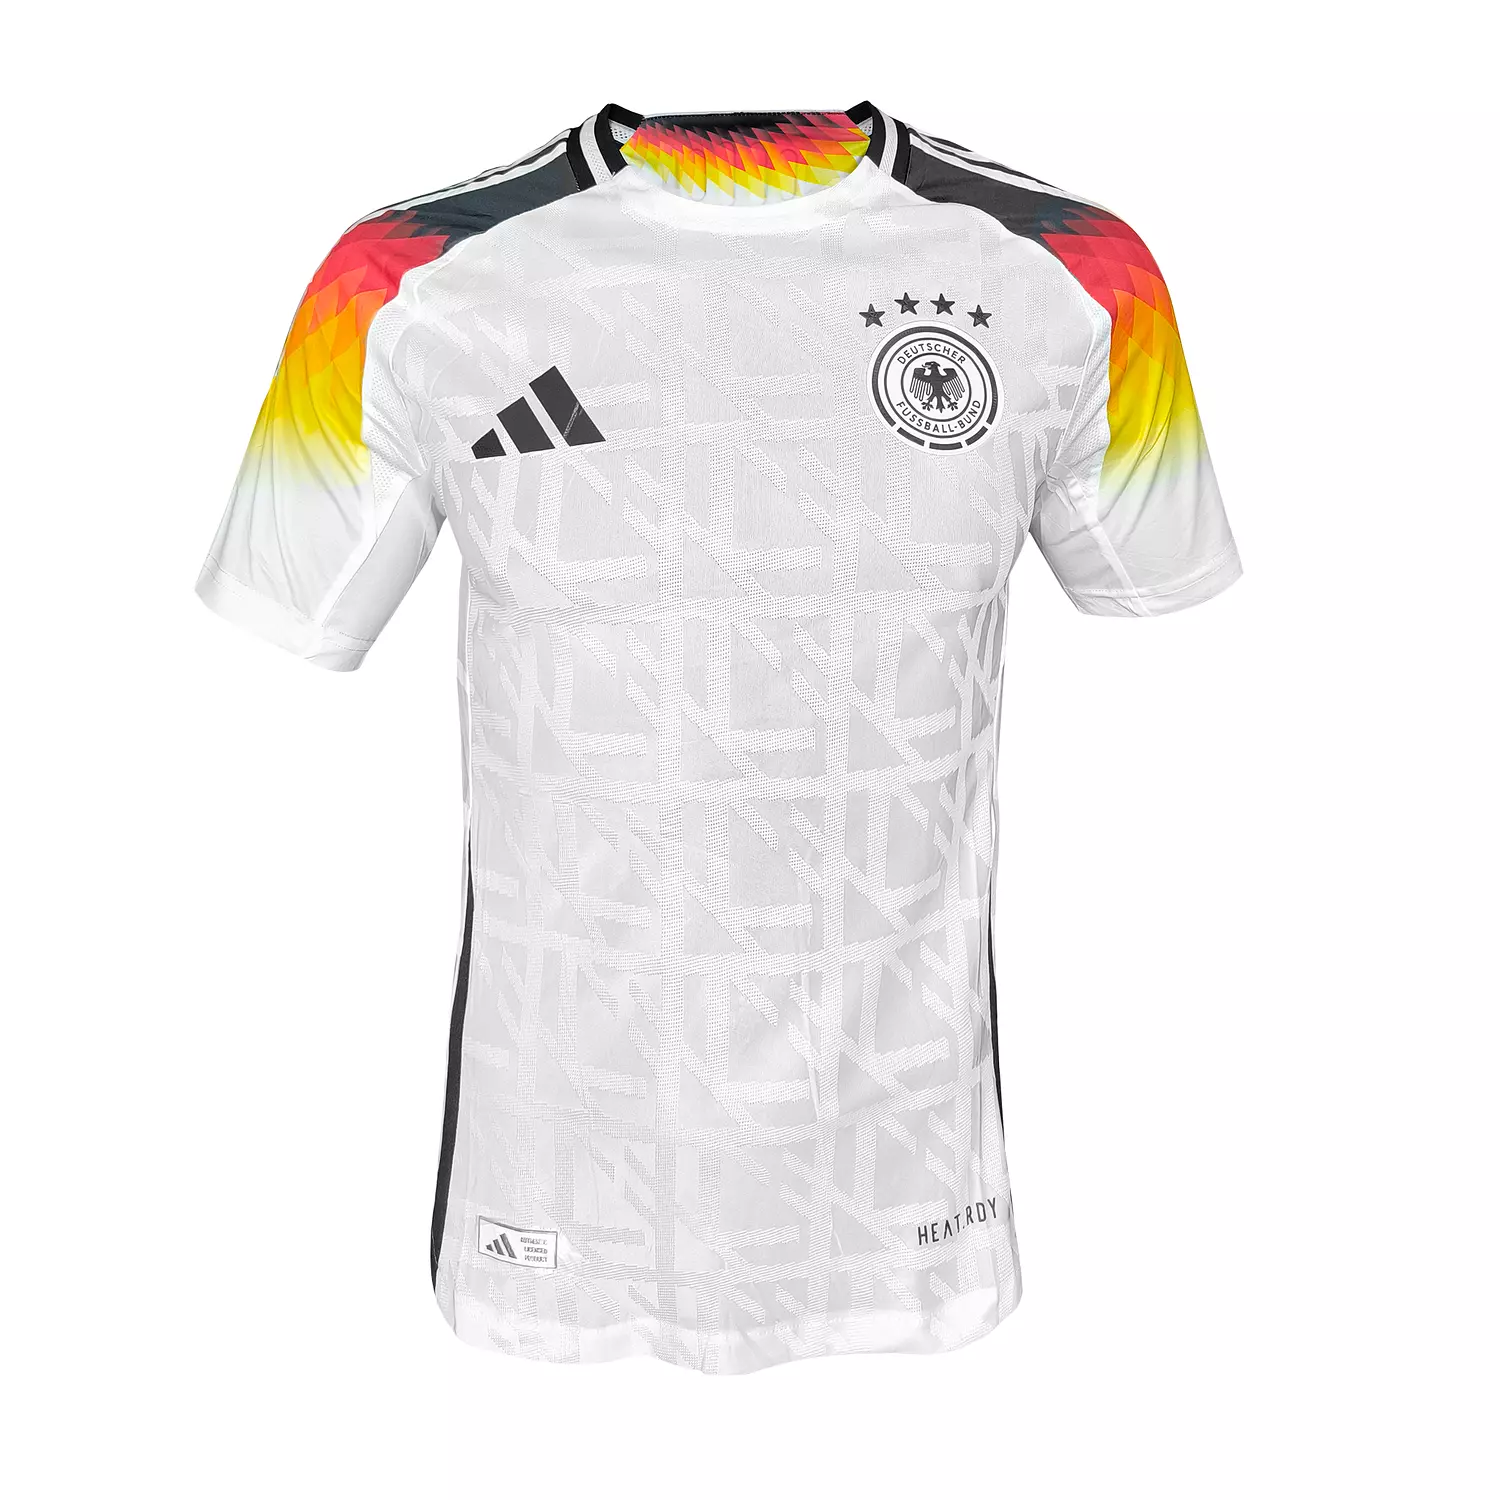 <p><strong><span style="color: rgb(0, 0, 0)">GERMANY EURO 24</span></strong></p><p><strong><span style="color: rgb(161, 161, 161)">PLAYER EDITION</span></strong></p>